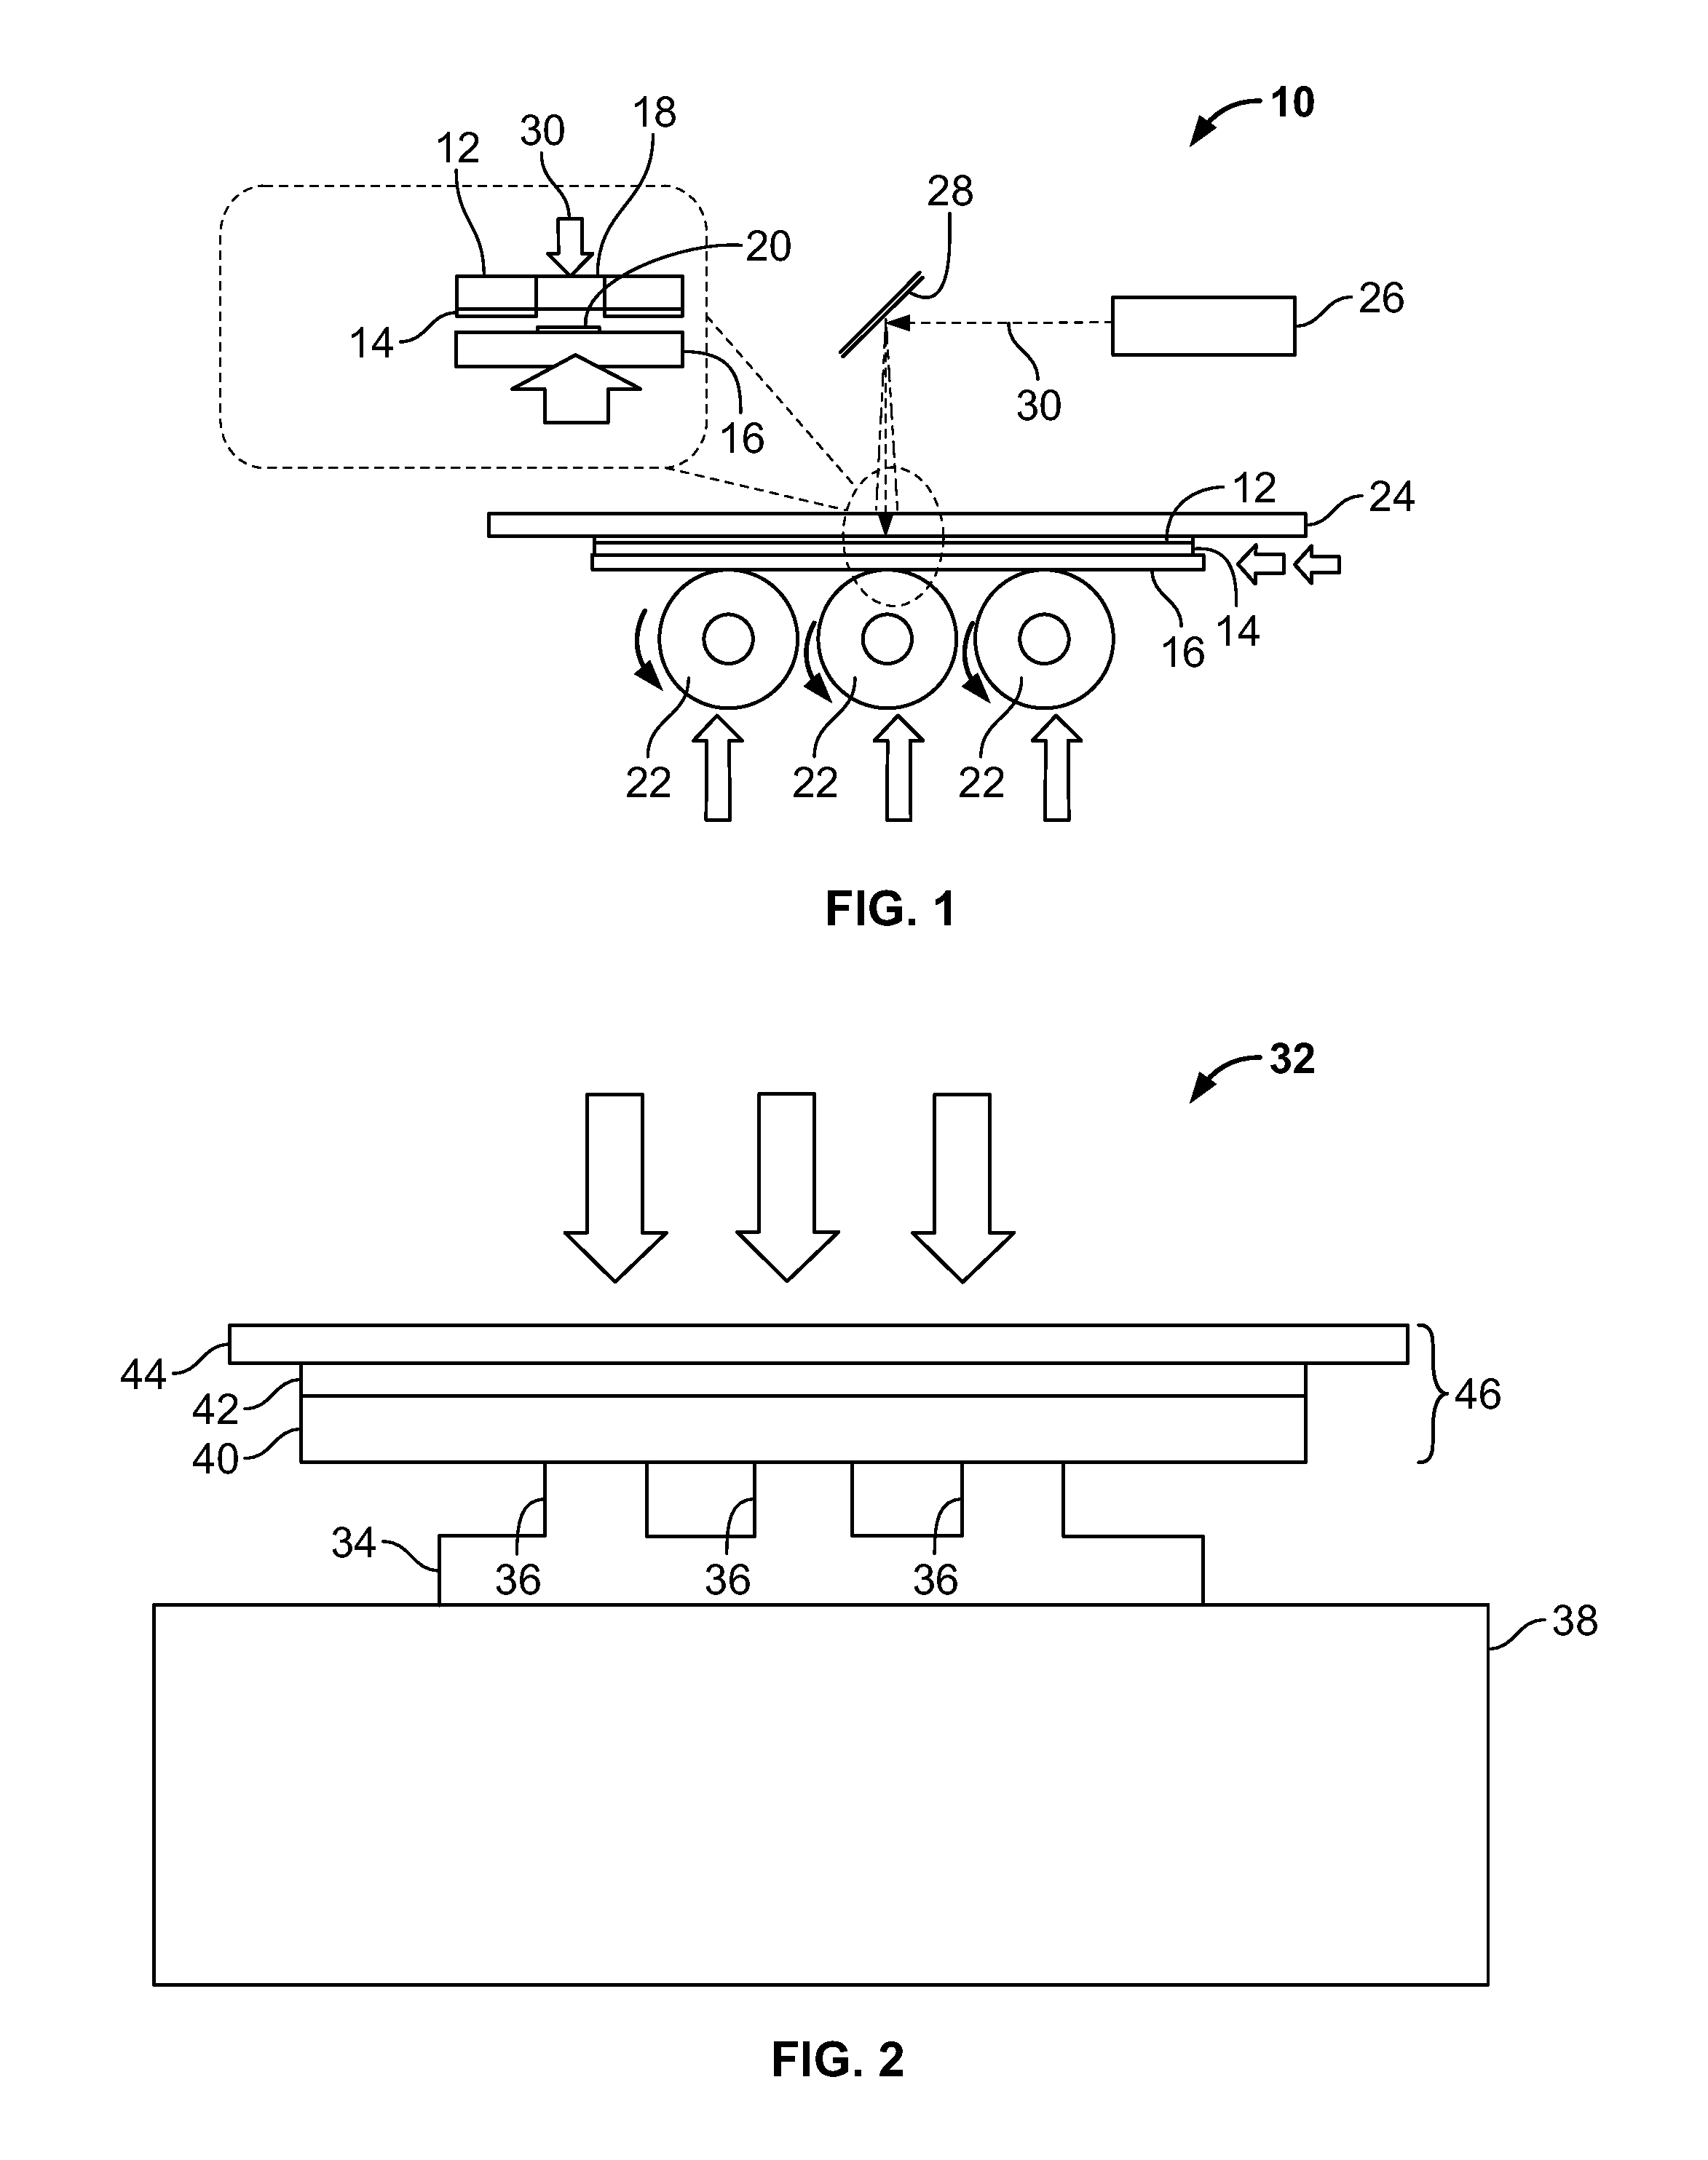 High-throughput graphene printing and selective transfer using a localized laser heating technique